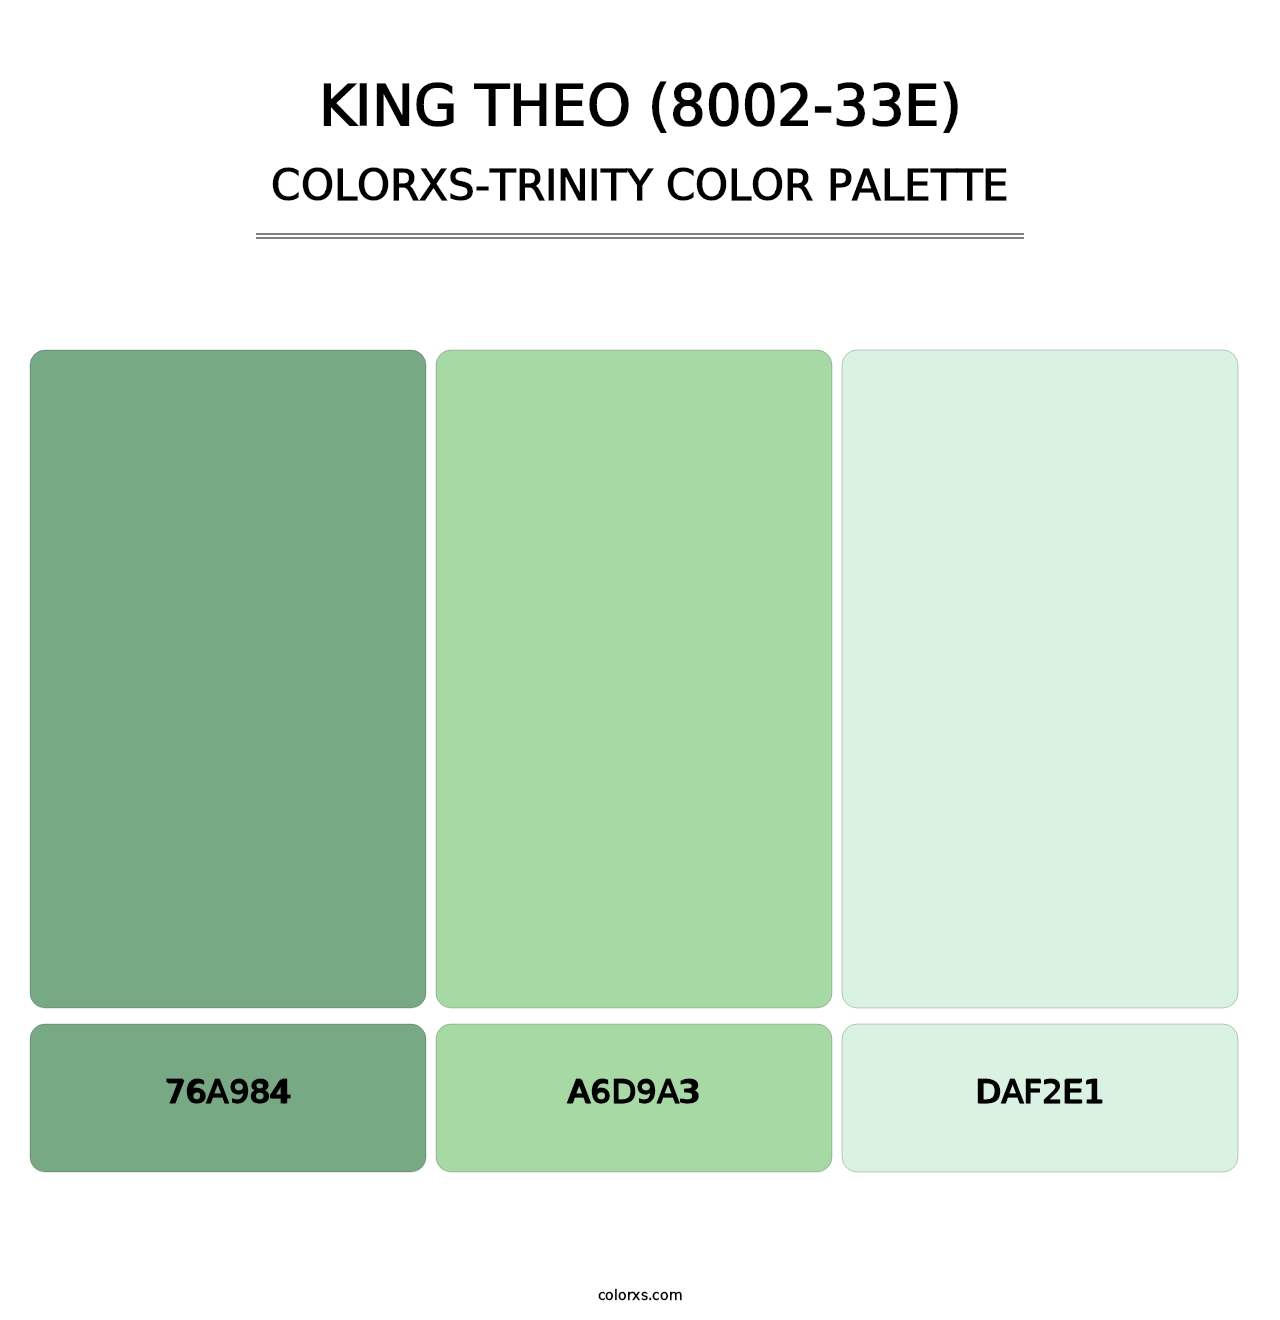 King Theo (8002-33E) - Colorxs Trinity Palette